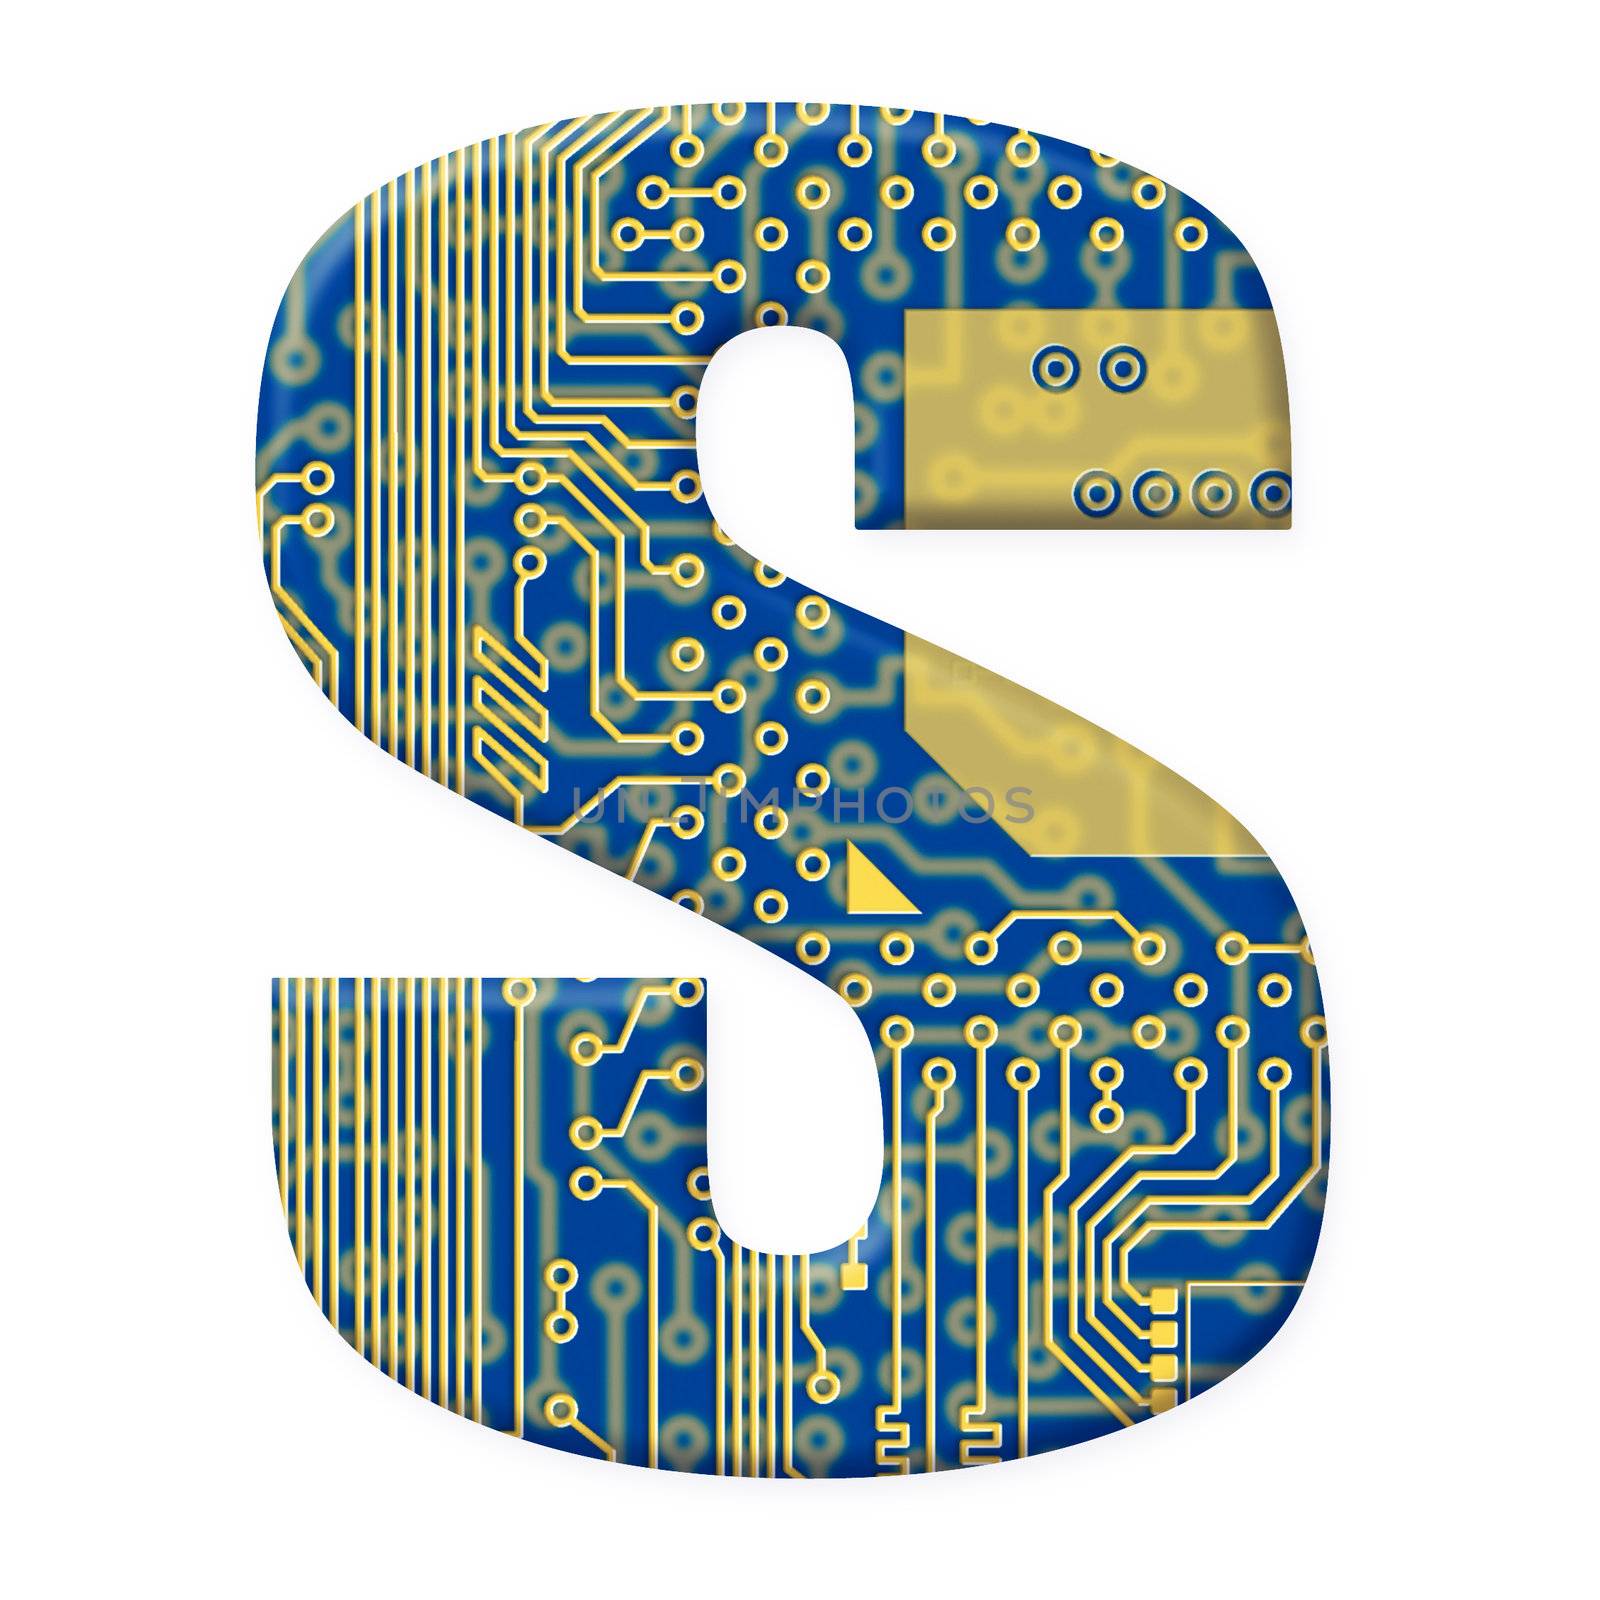 One letter from the electronic technology circuit board alphabet on a white background - S